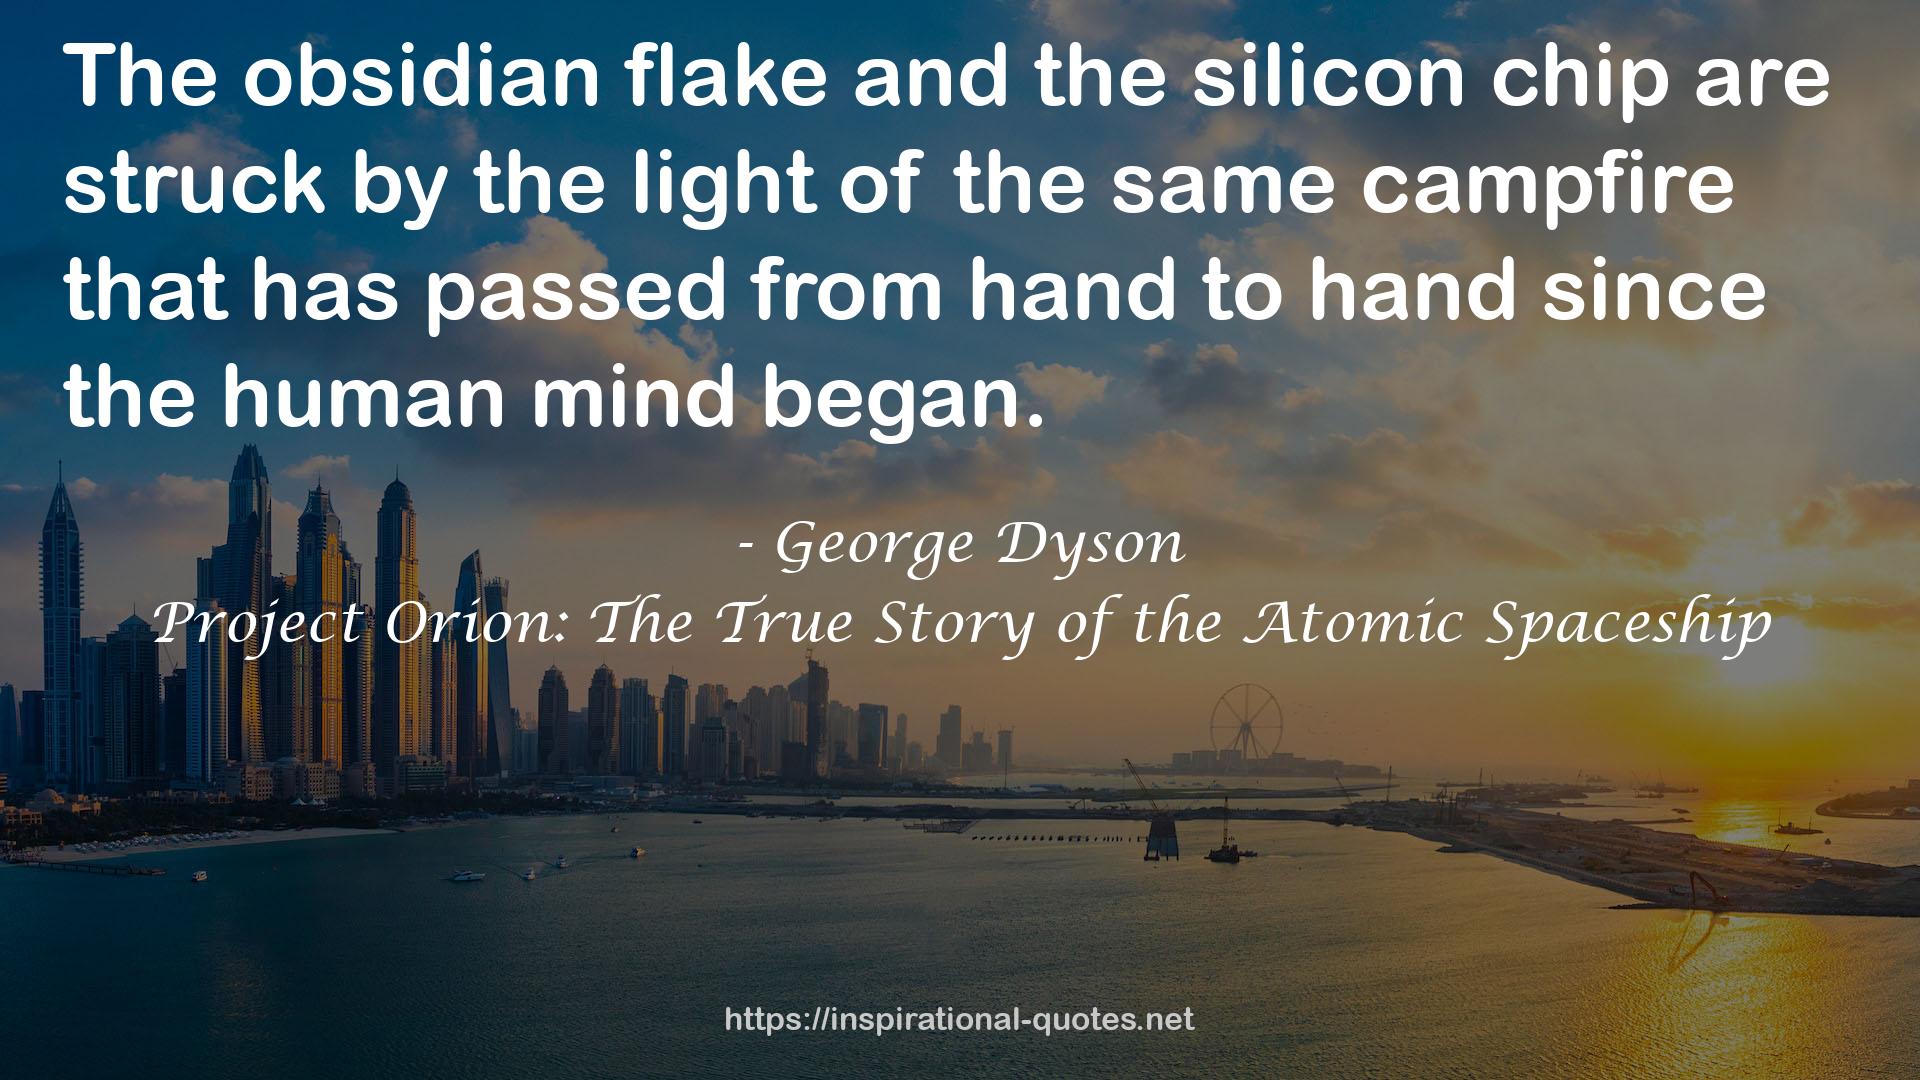 Project Orion: The True Story of the Atomic Spaceship QUOTES